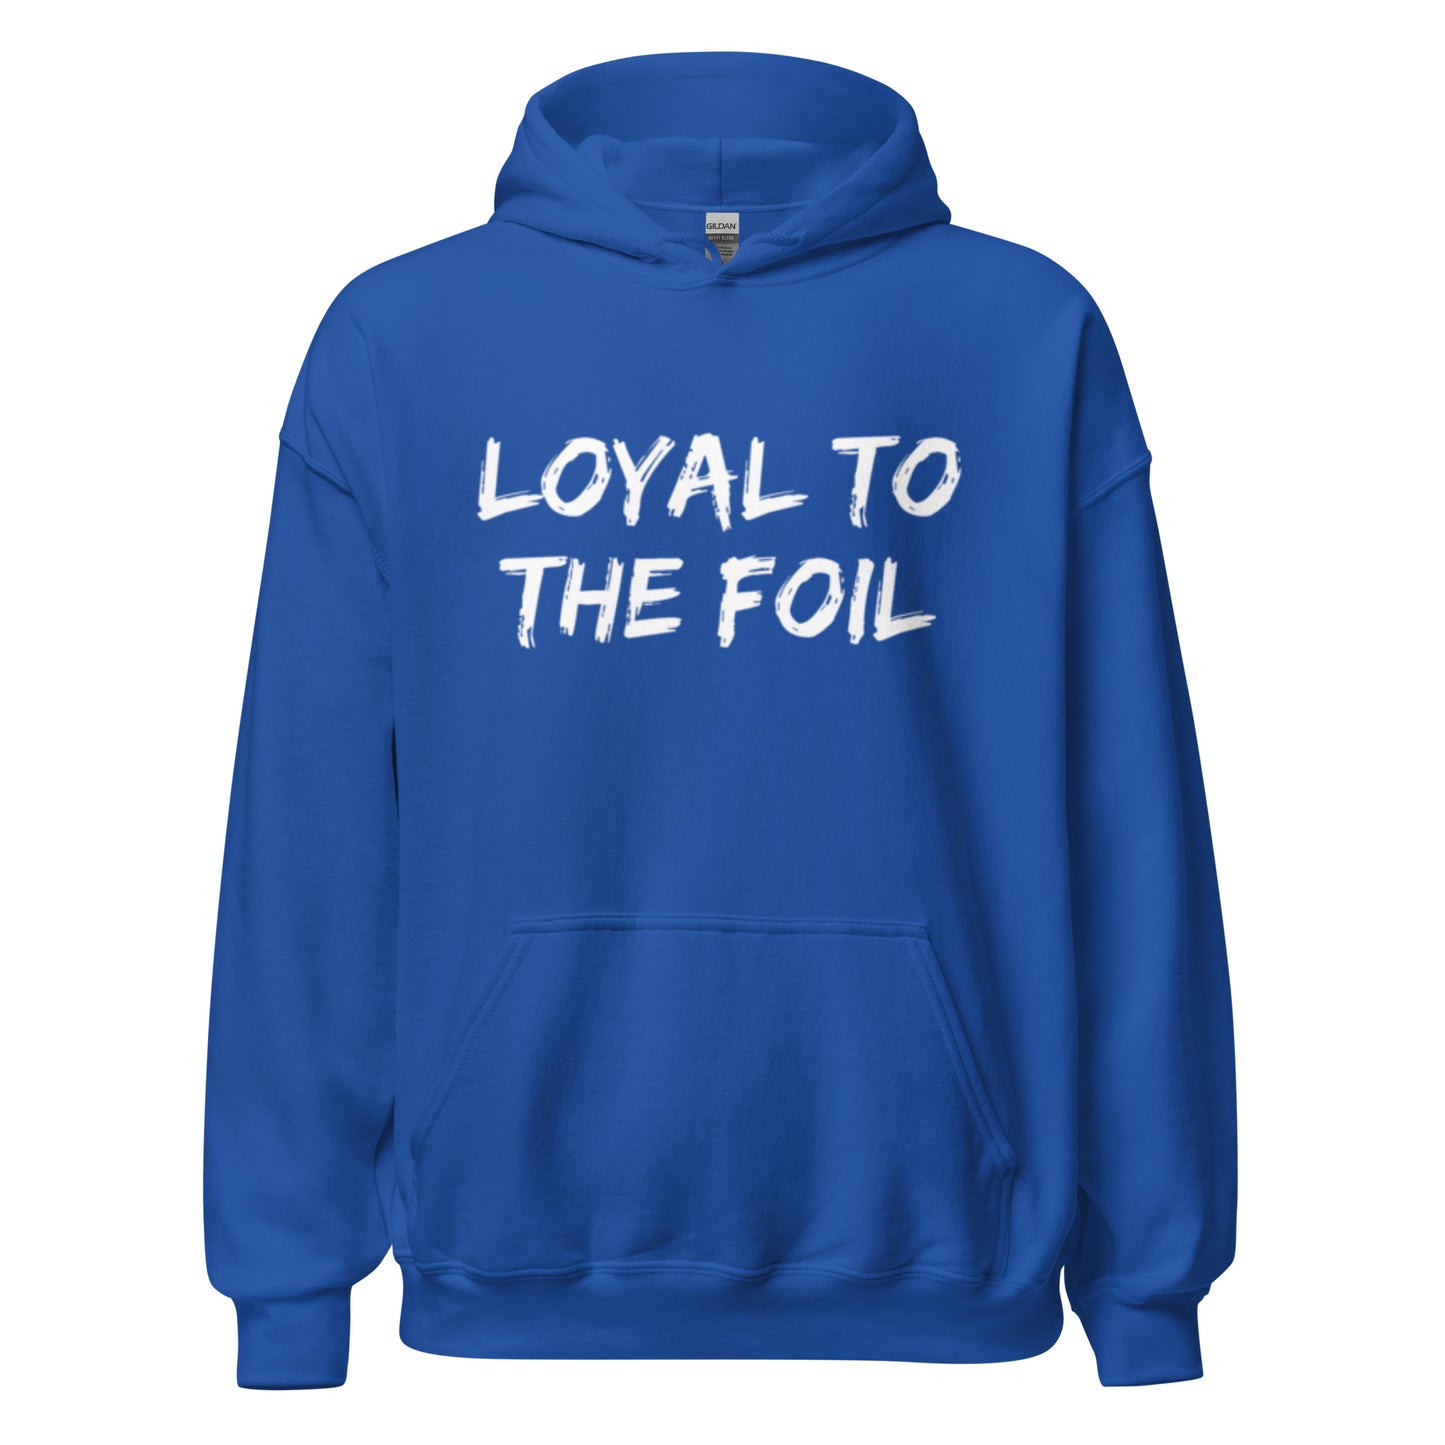 Loyal To The Foil Hoodies